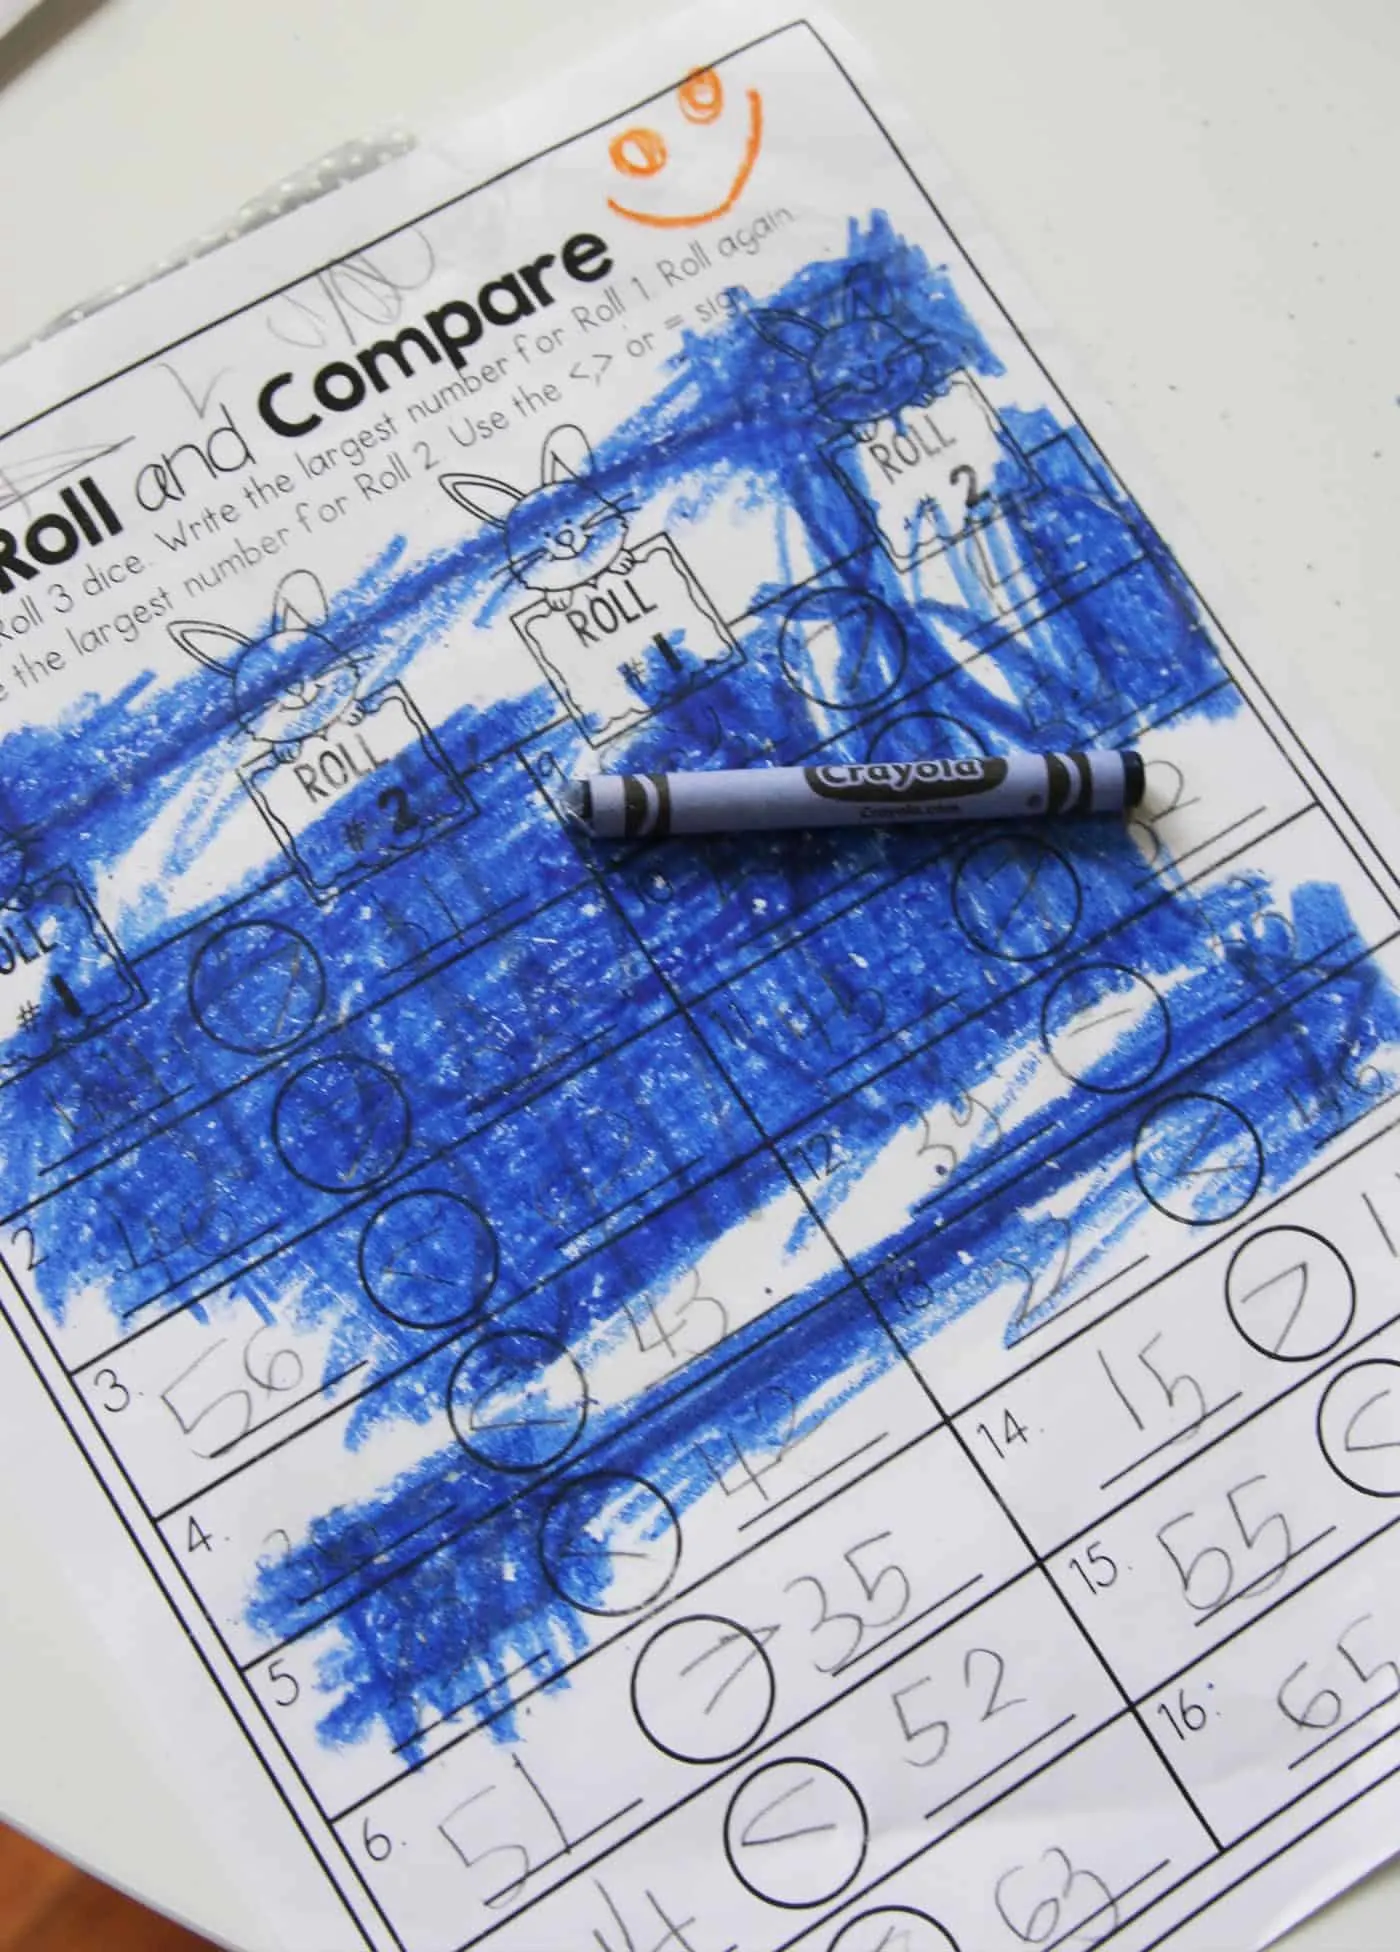 Coloring on a worksheet with blue crayon